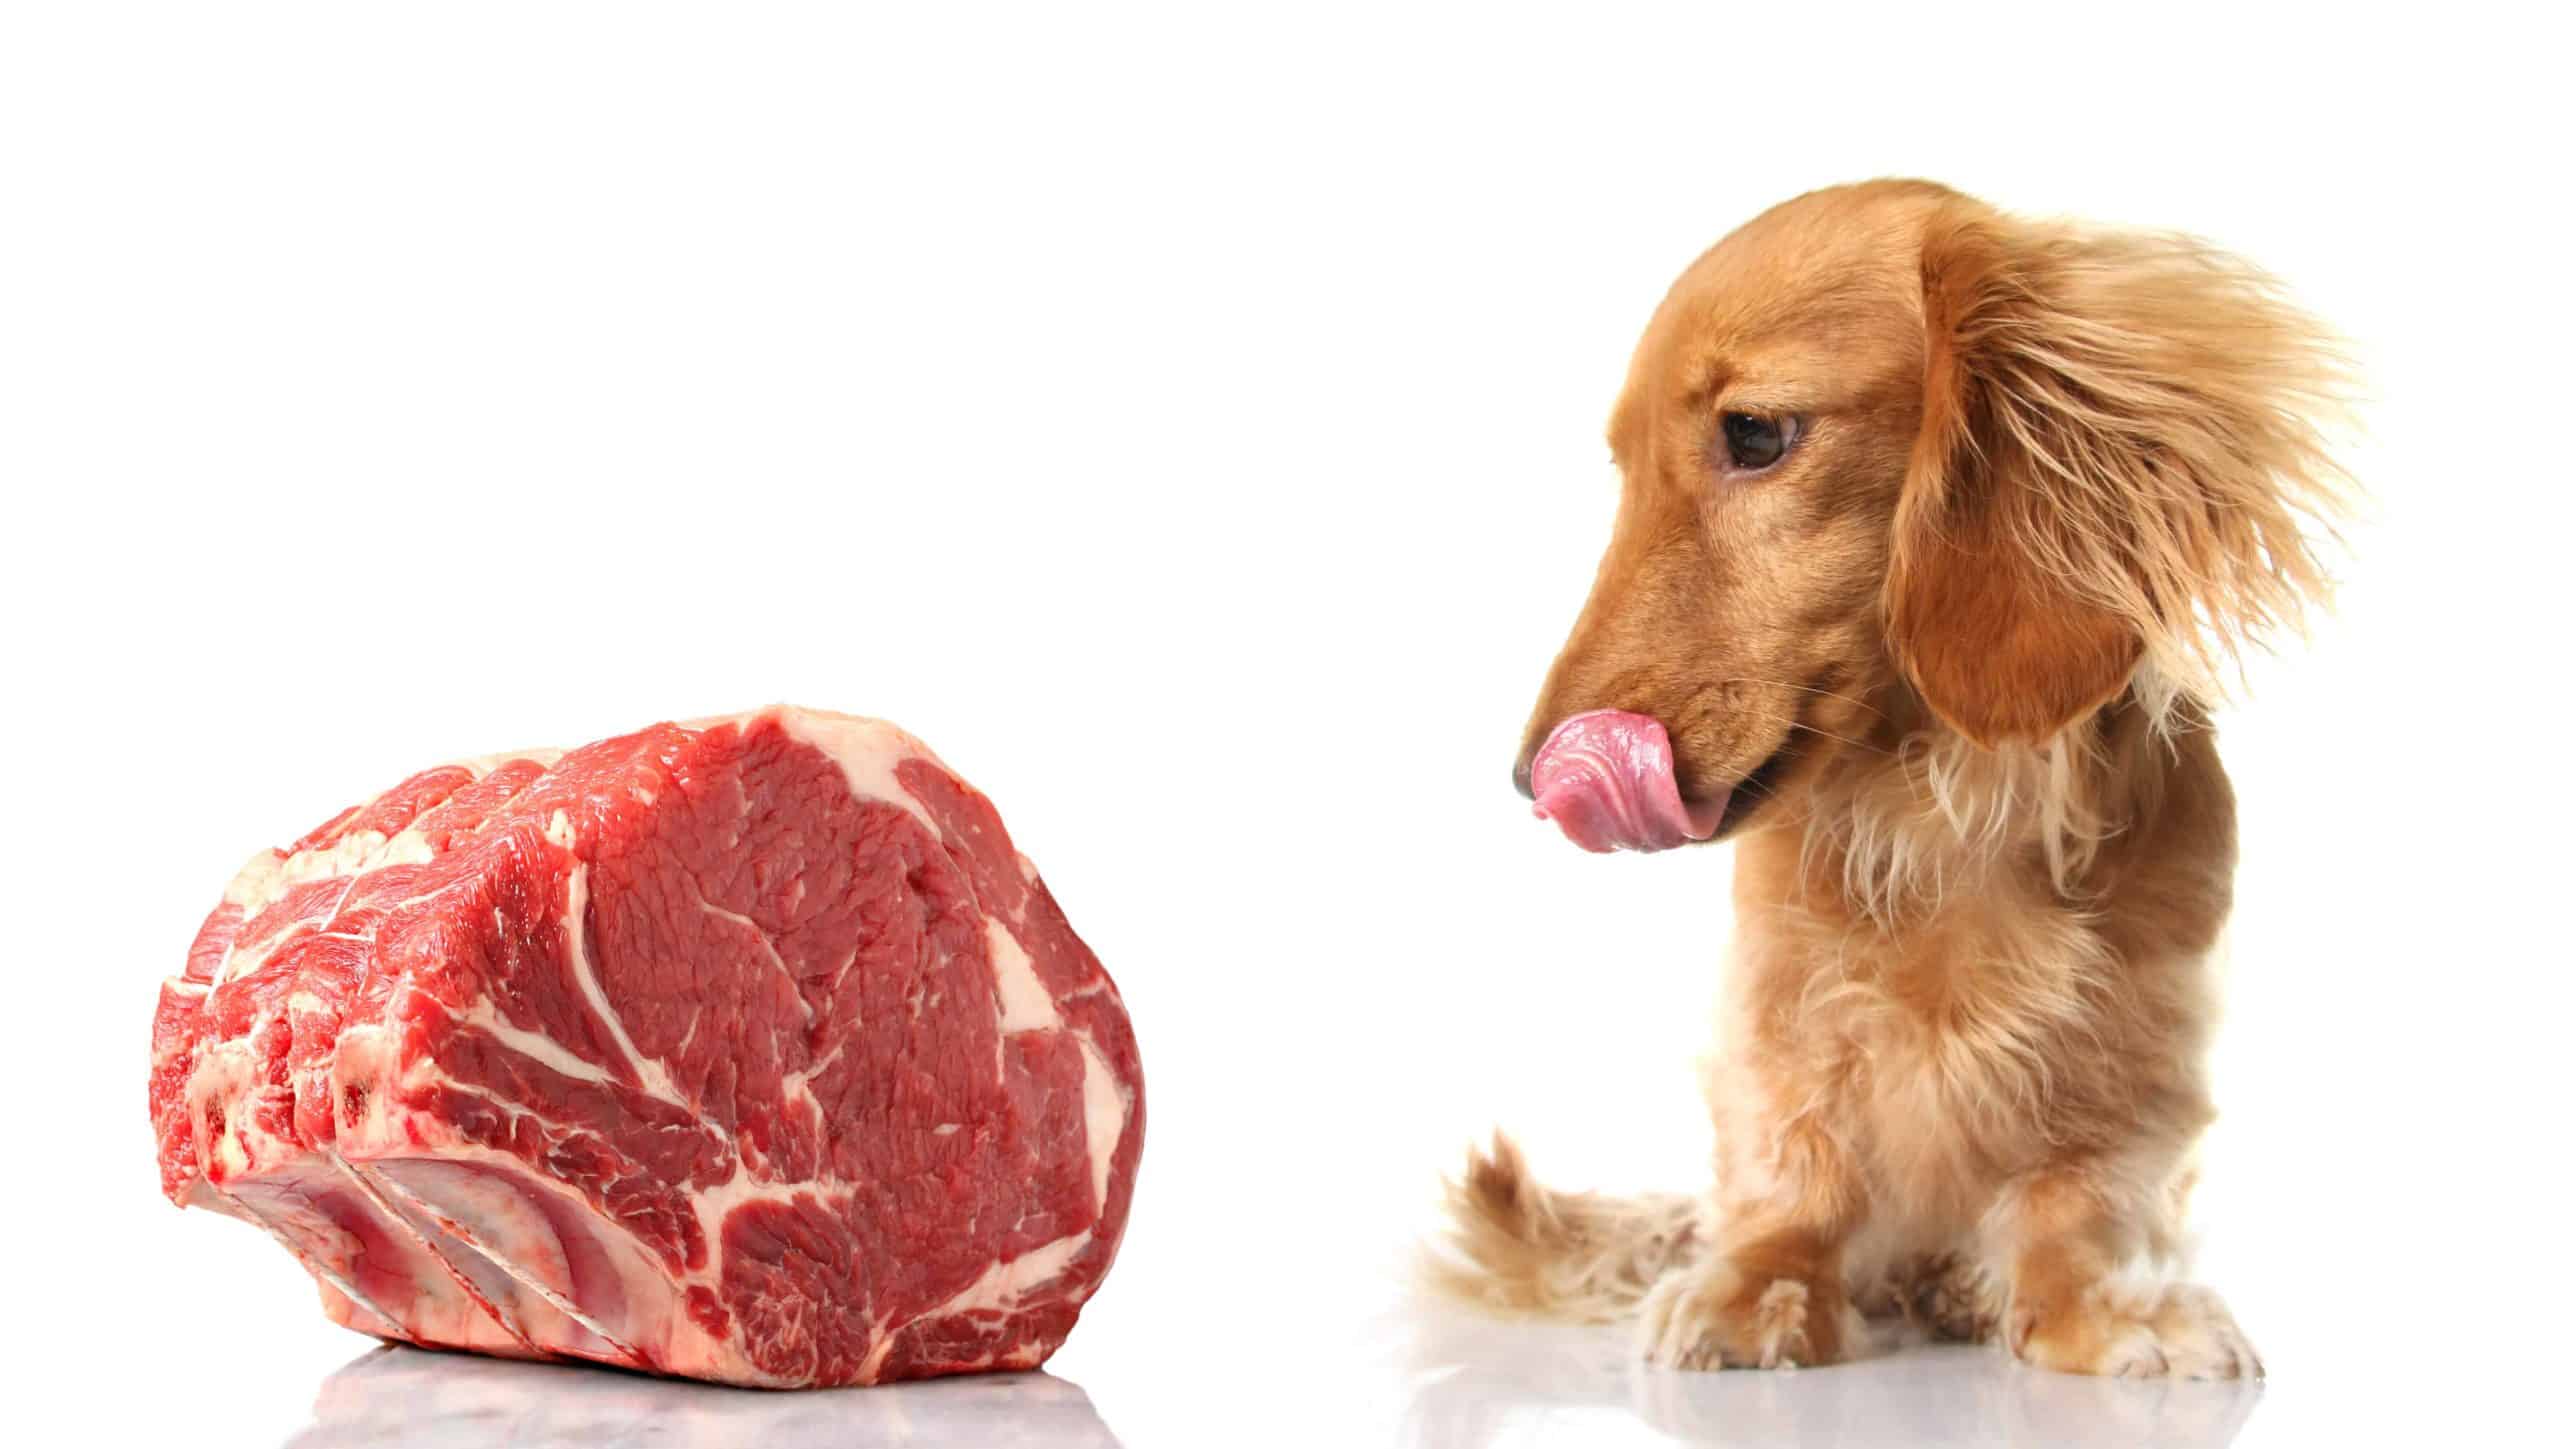 Dog licks lips while looking at beef. From stews and soups to stir-fries or even just raw meat, here are eight ways you can cook beef for your dog.